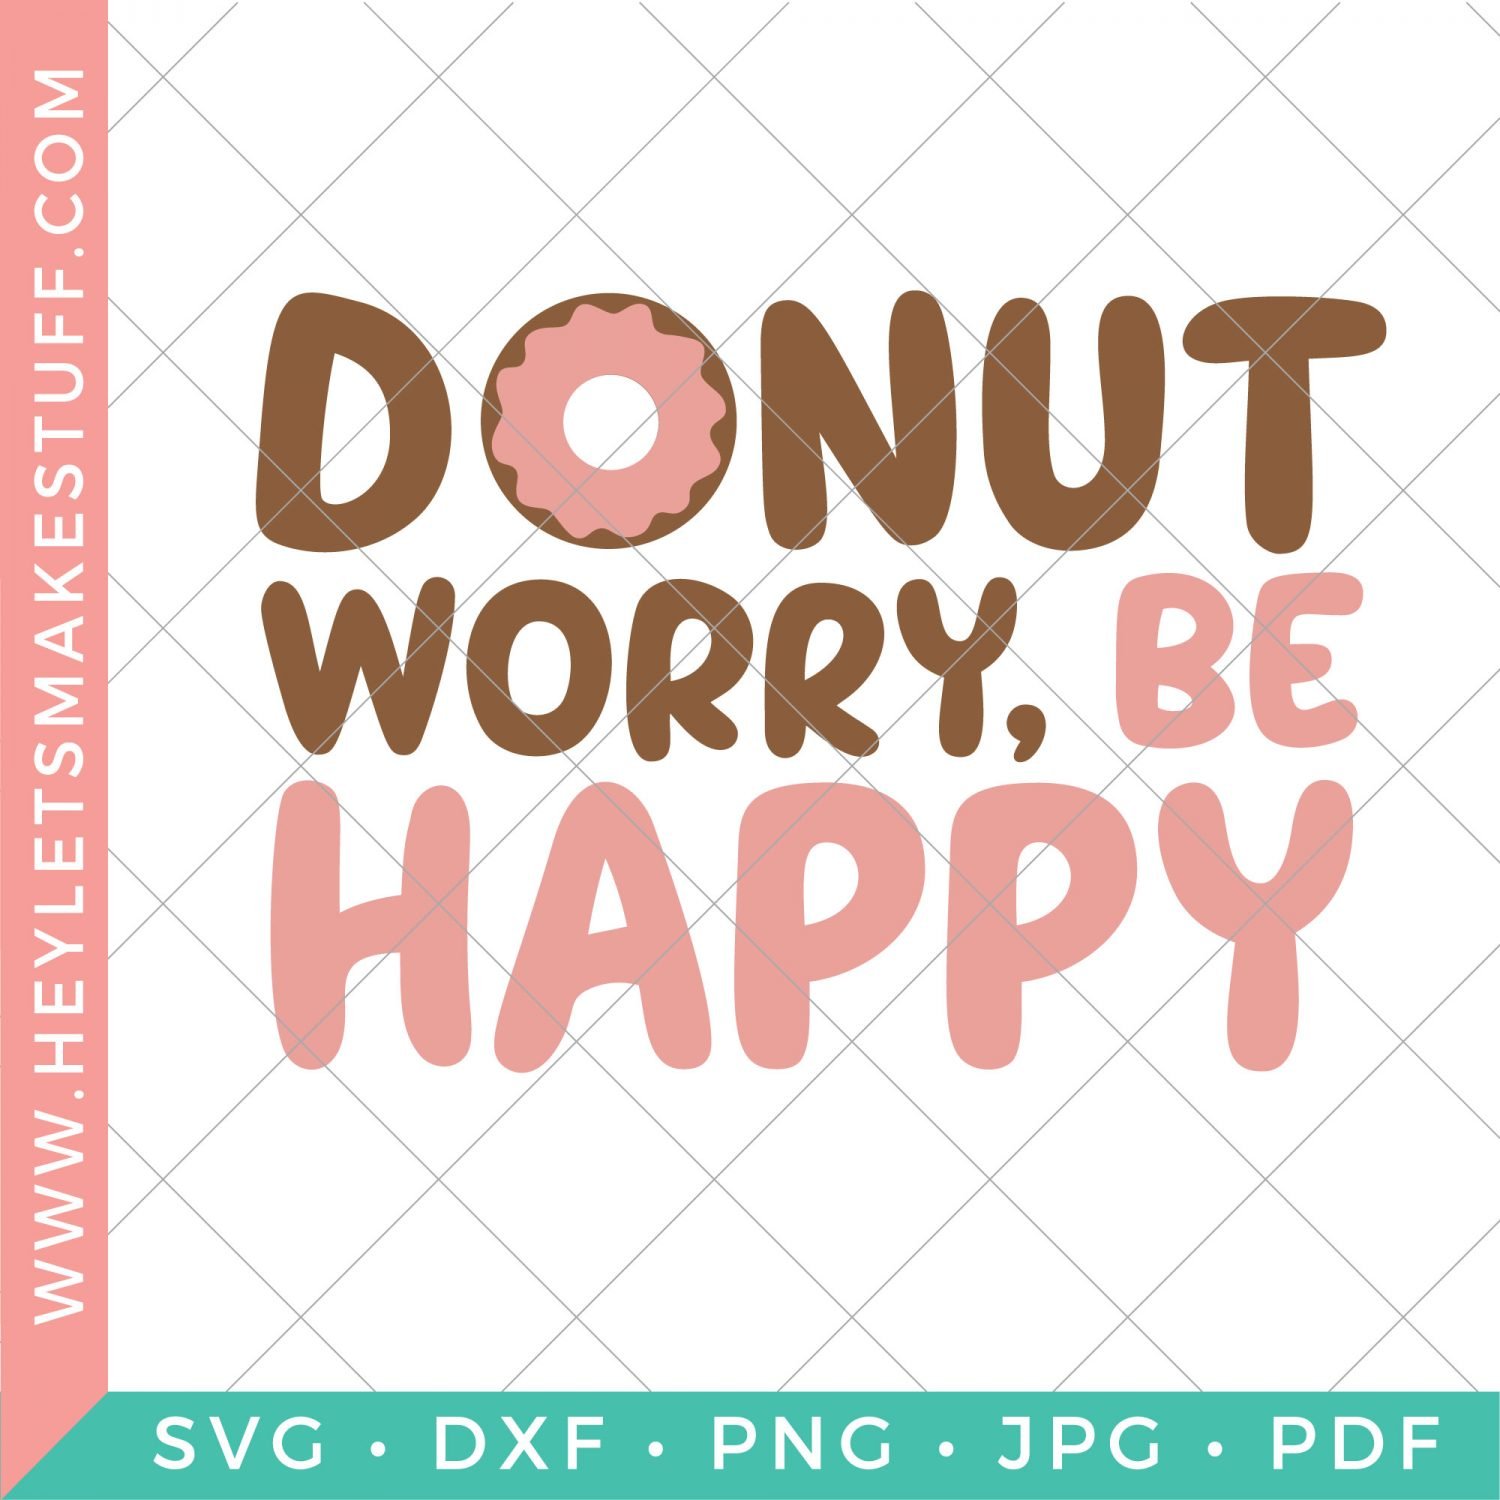 Donut Worry Be Happy SVG